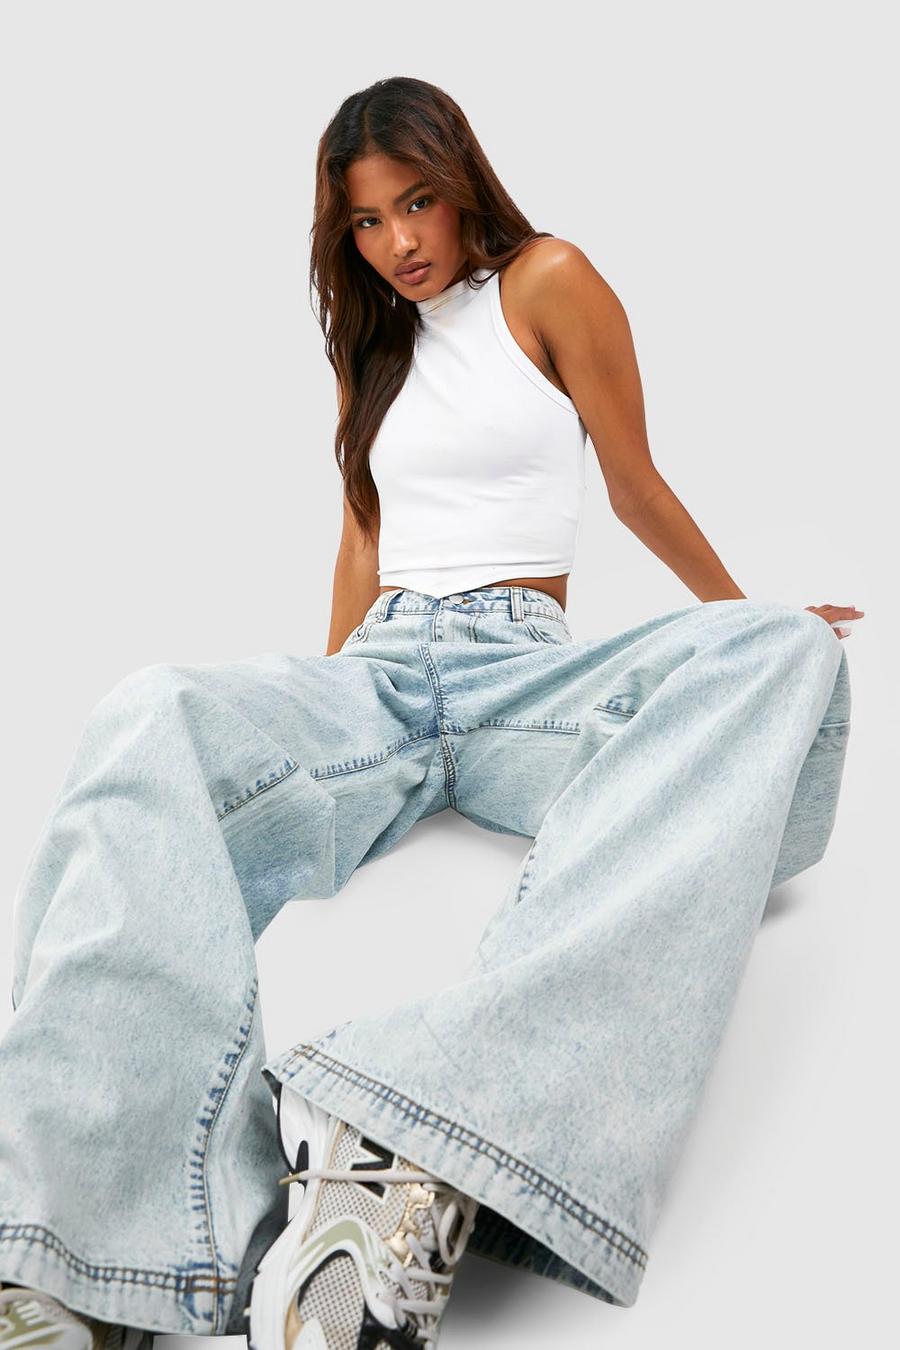 Stone Washed Jeans for Tall Women